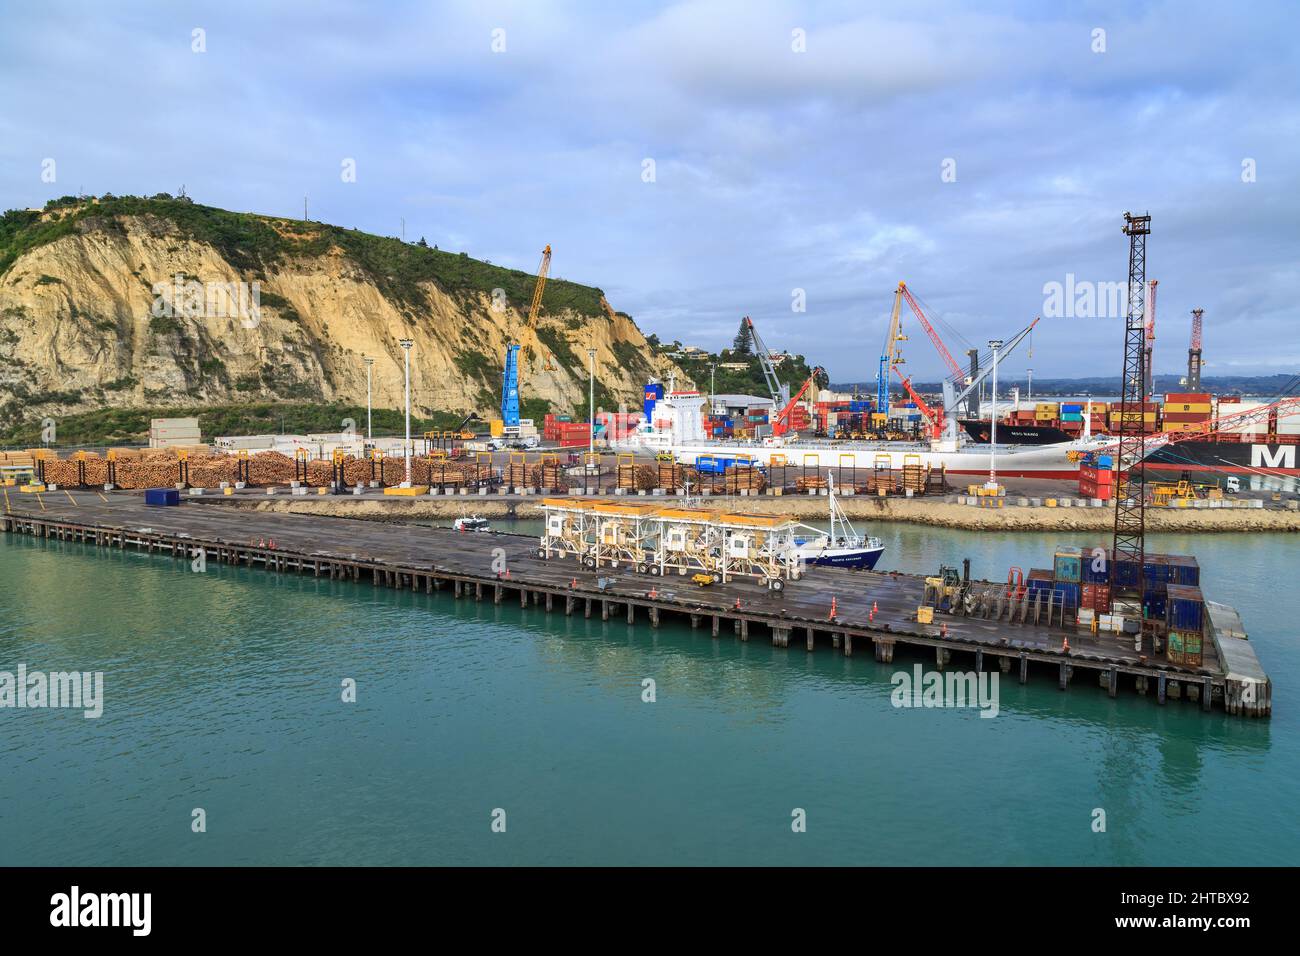 The Port of Napier, Napier, New Zealand, with cargo vessels tied up at the wharves Stock Photo